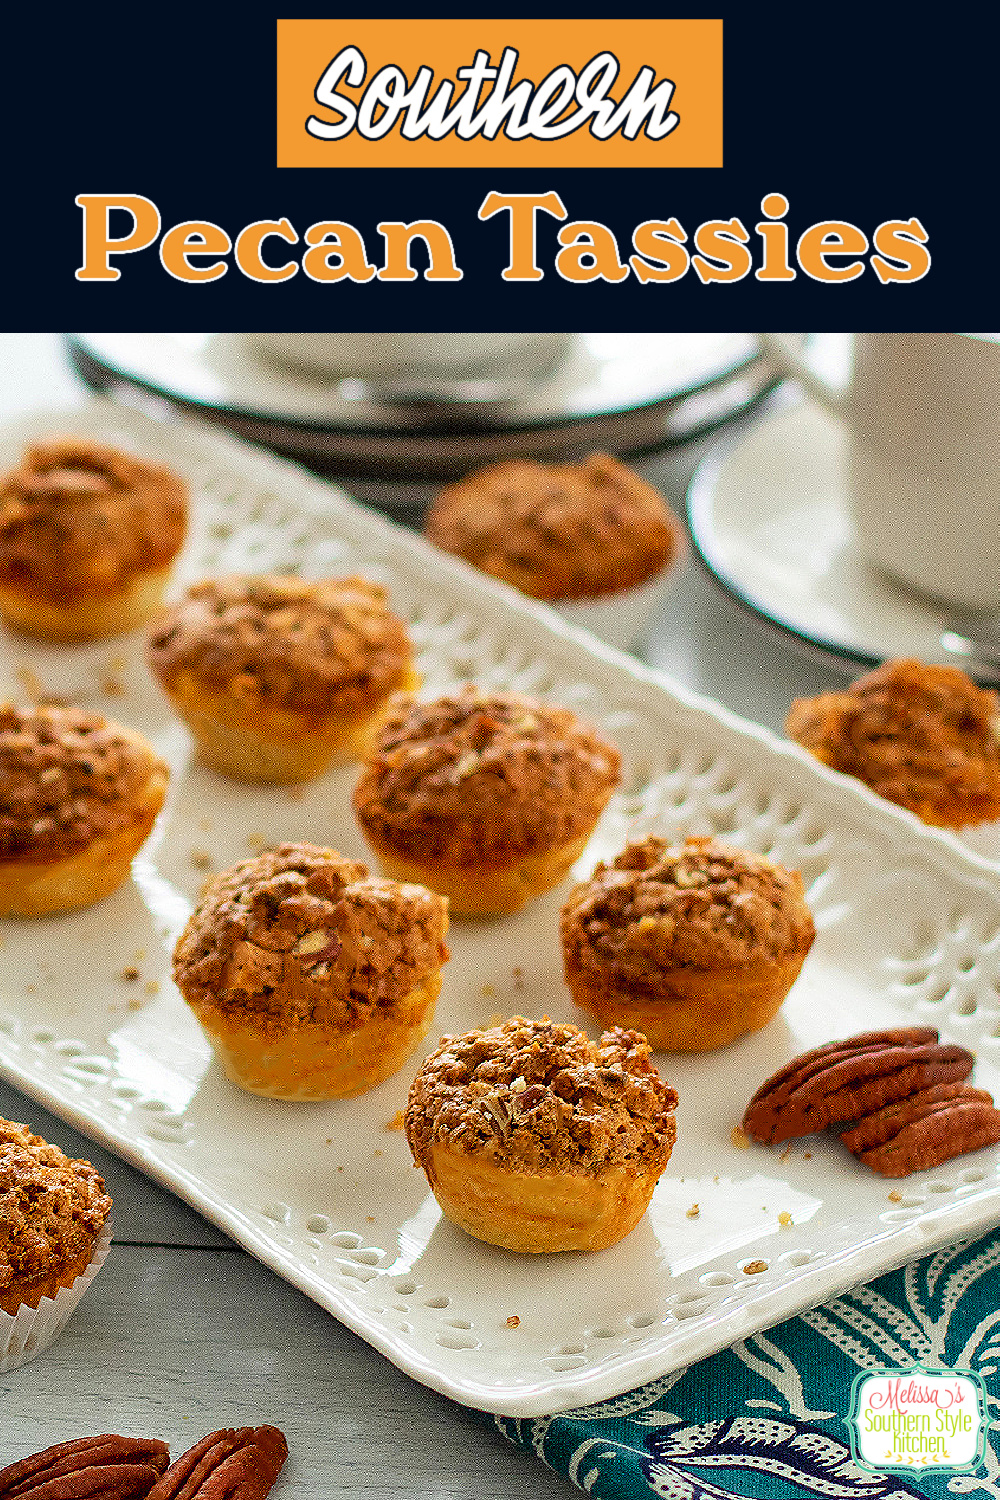 These two bite Southern Pecan Tassies are perfect for the holidays, tea parties and any event when bite size sweets are on the menu #pecantassies #pecancookies #pecanpie #pecandesserts #minidesserts #tassies #tassierecipes